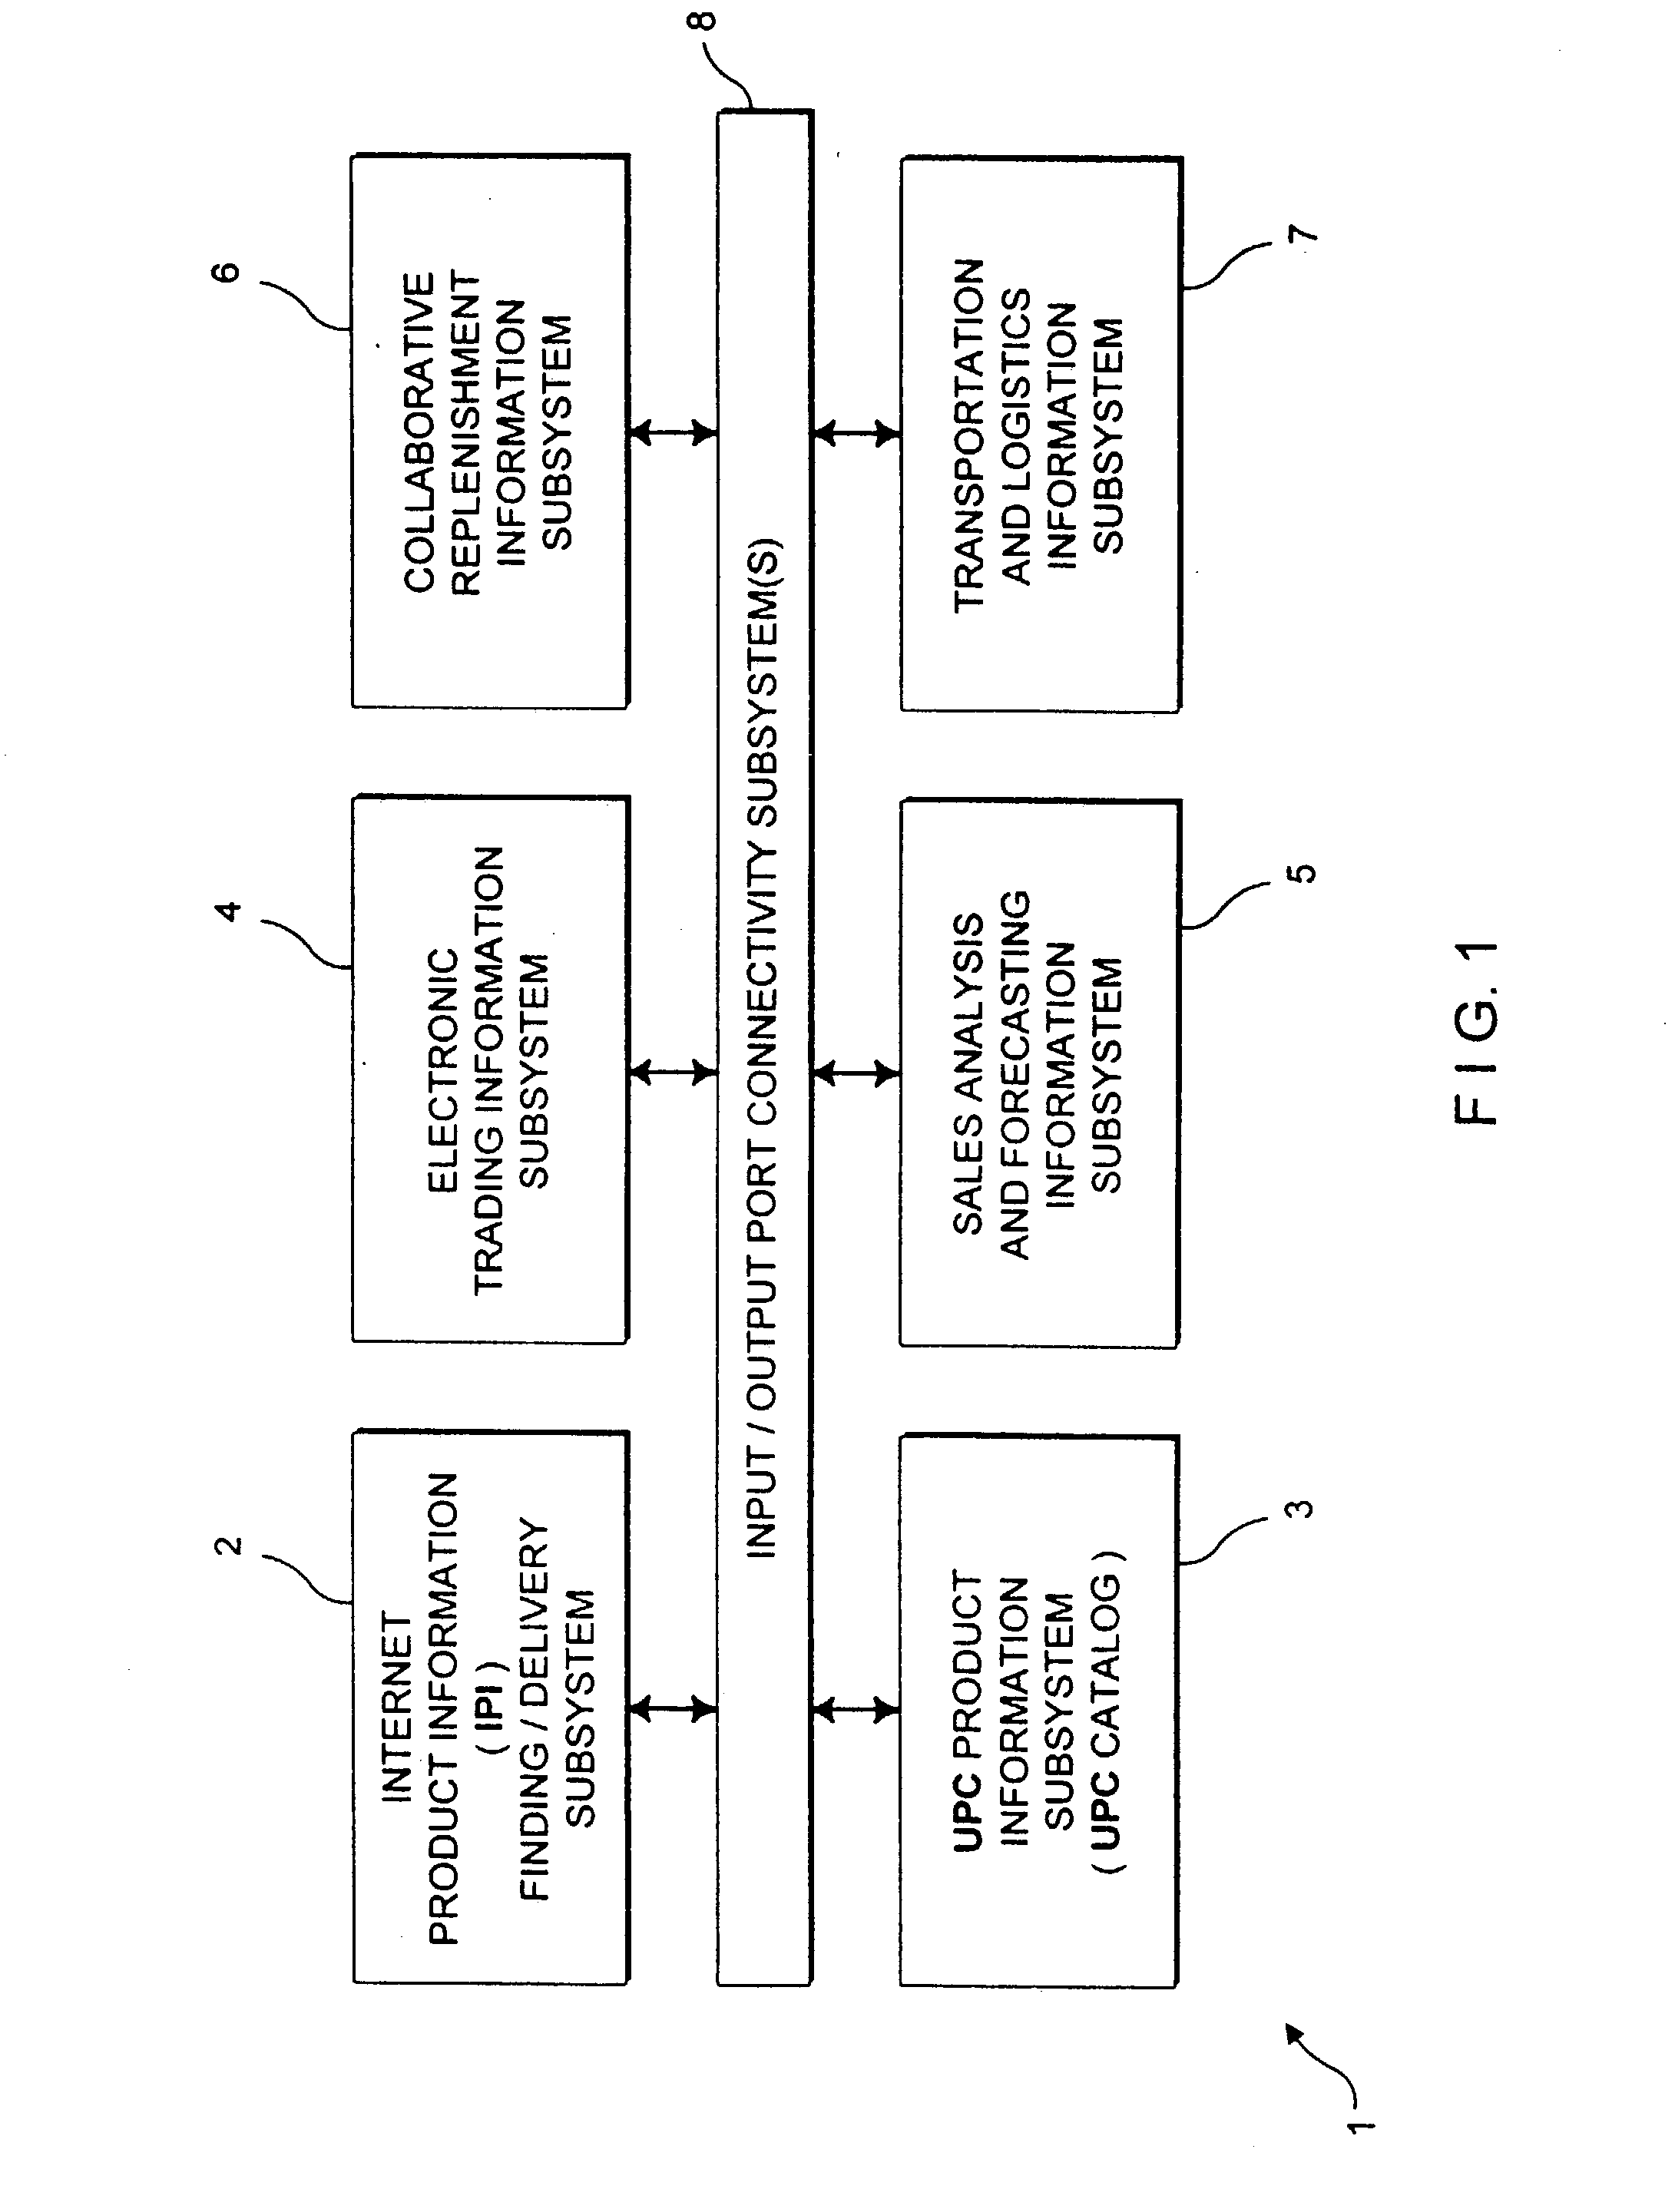 Method of and system for delivering manufacturer-managed consumer product related information to consumers over the internet